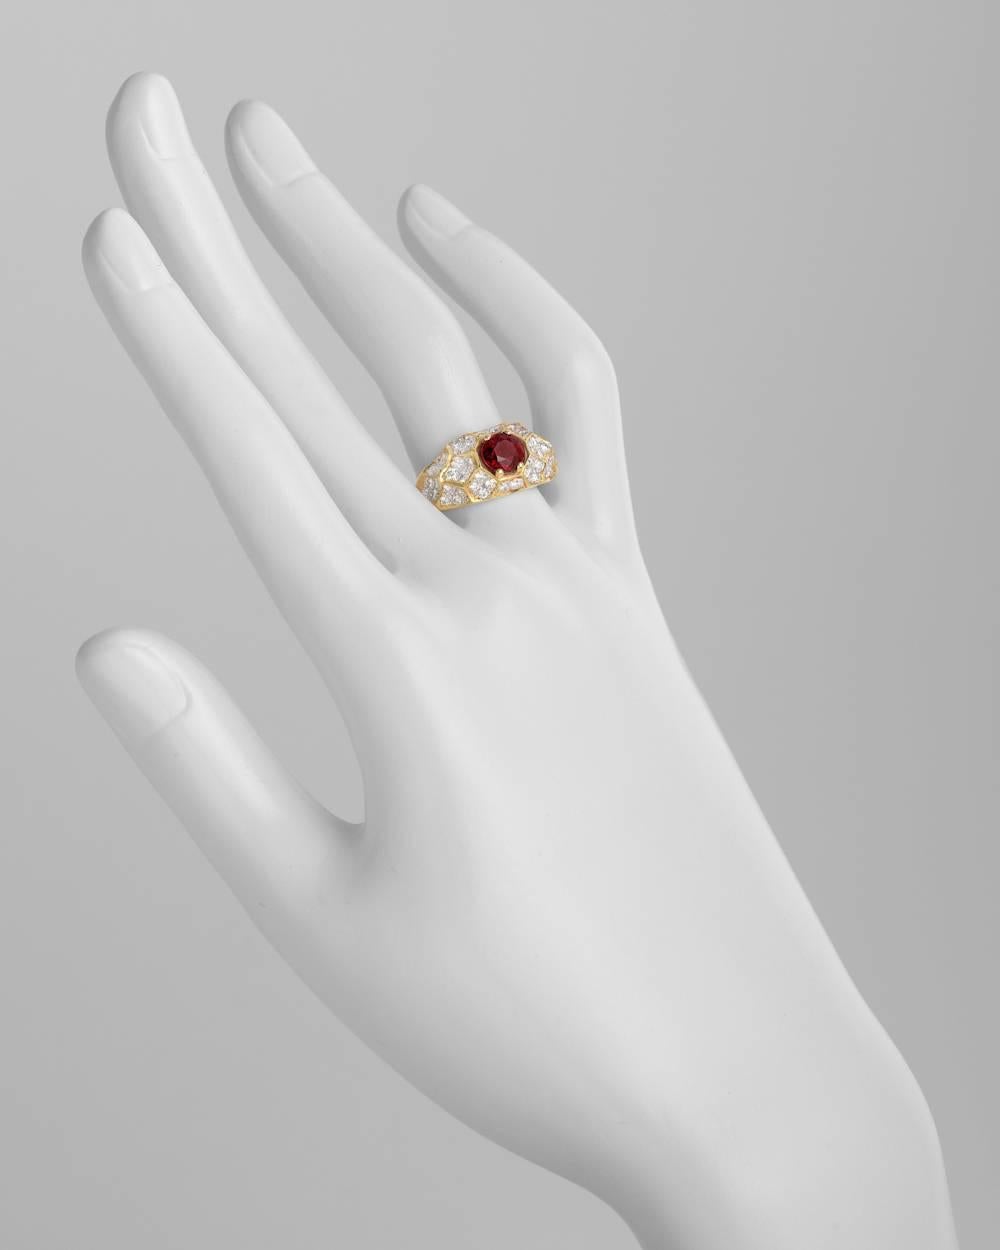 Ruby and diamond domed dress ring, centering a modified brilliant-cut ruby weighing 1.08 carats, with 52 pavé-set diamond accents weighing approximately 0.78 total carats, mounted in 18k yellow and white gold, the ring measuring approximately 10mm